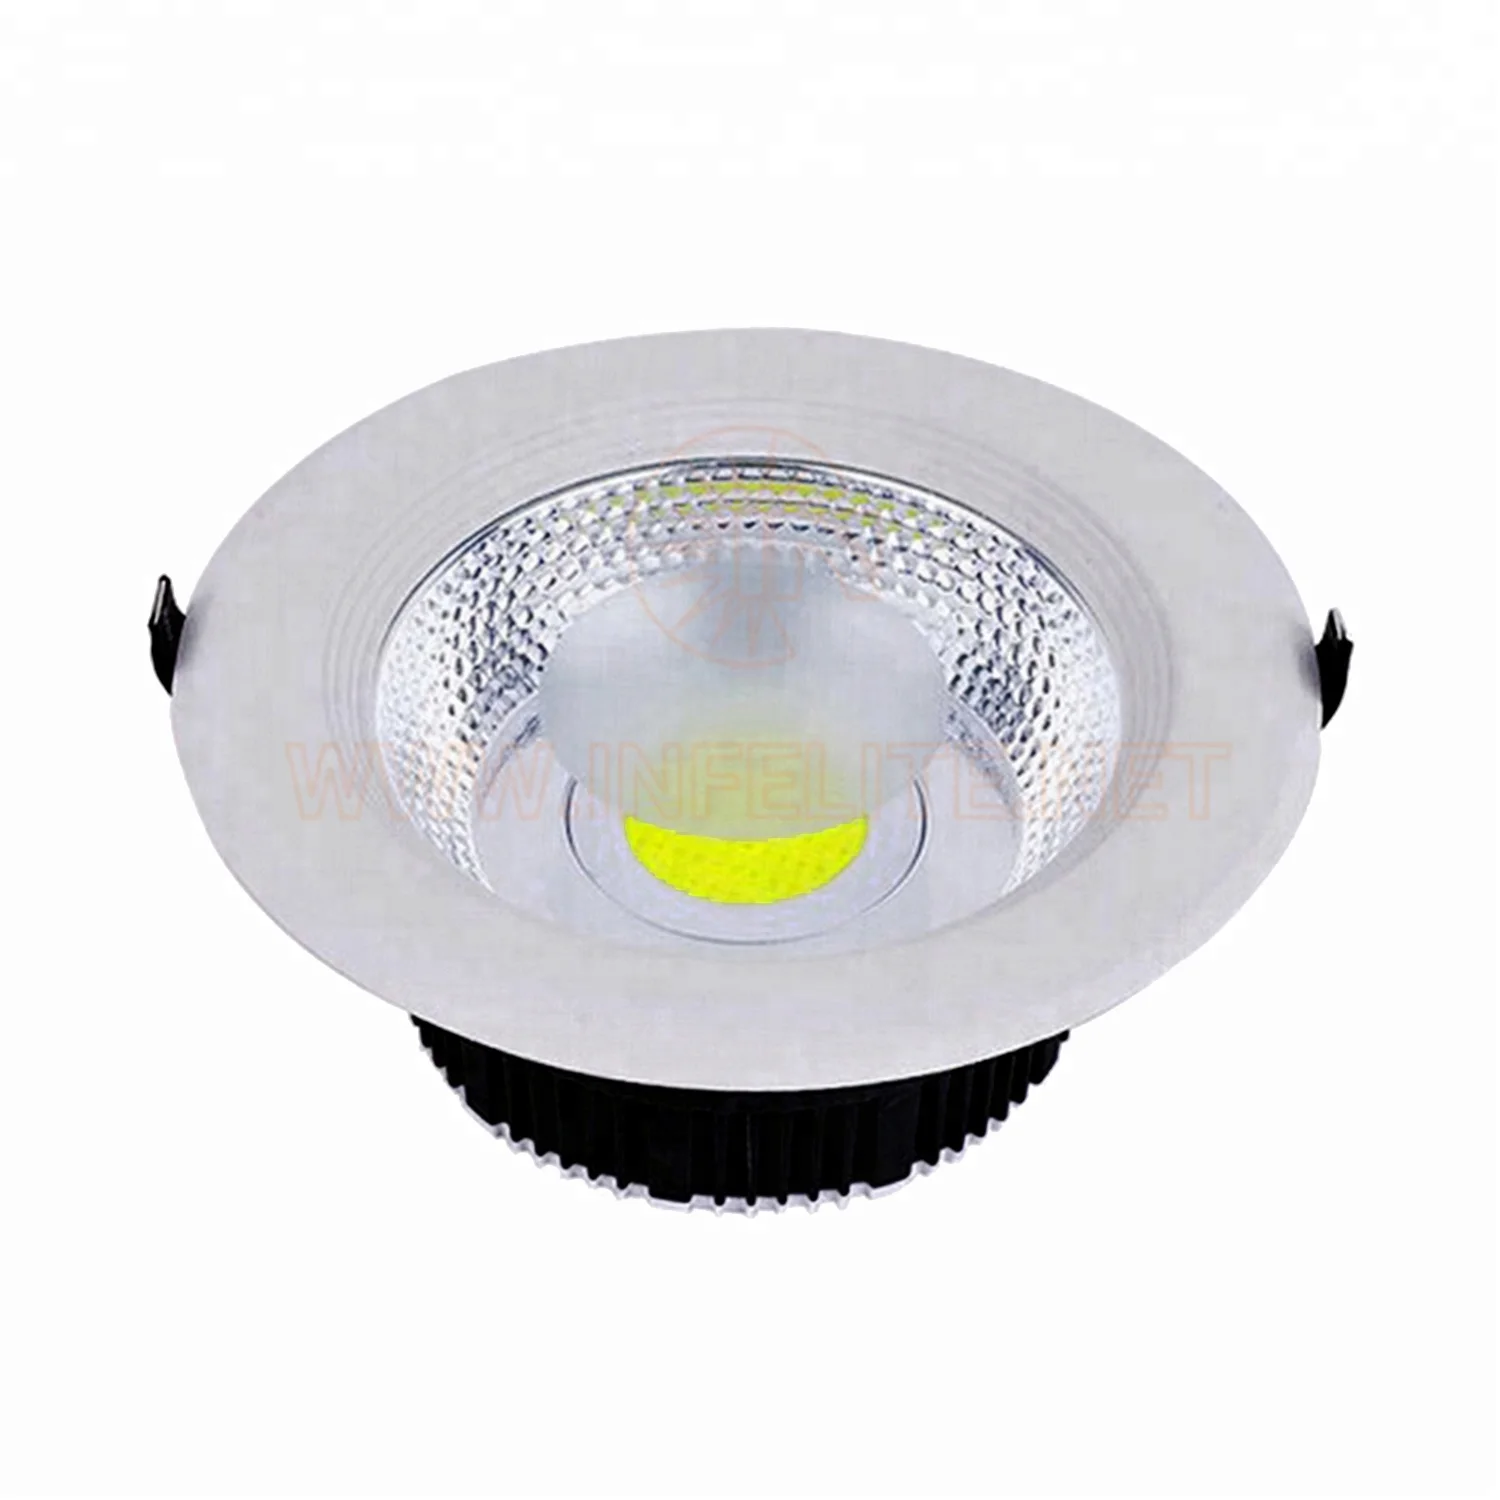 IN-DL107 Die Cast Aluminum Round Recessed Office Lobby Corridor Lamp 5W 10W 15W 20W 30W COB LED Ceiling Downlight Down Lighting